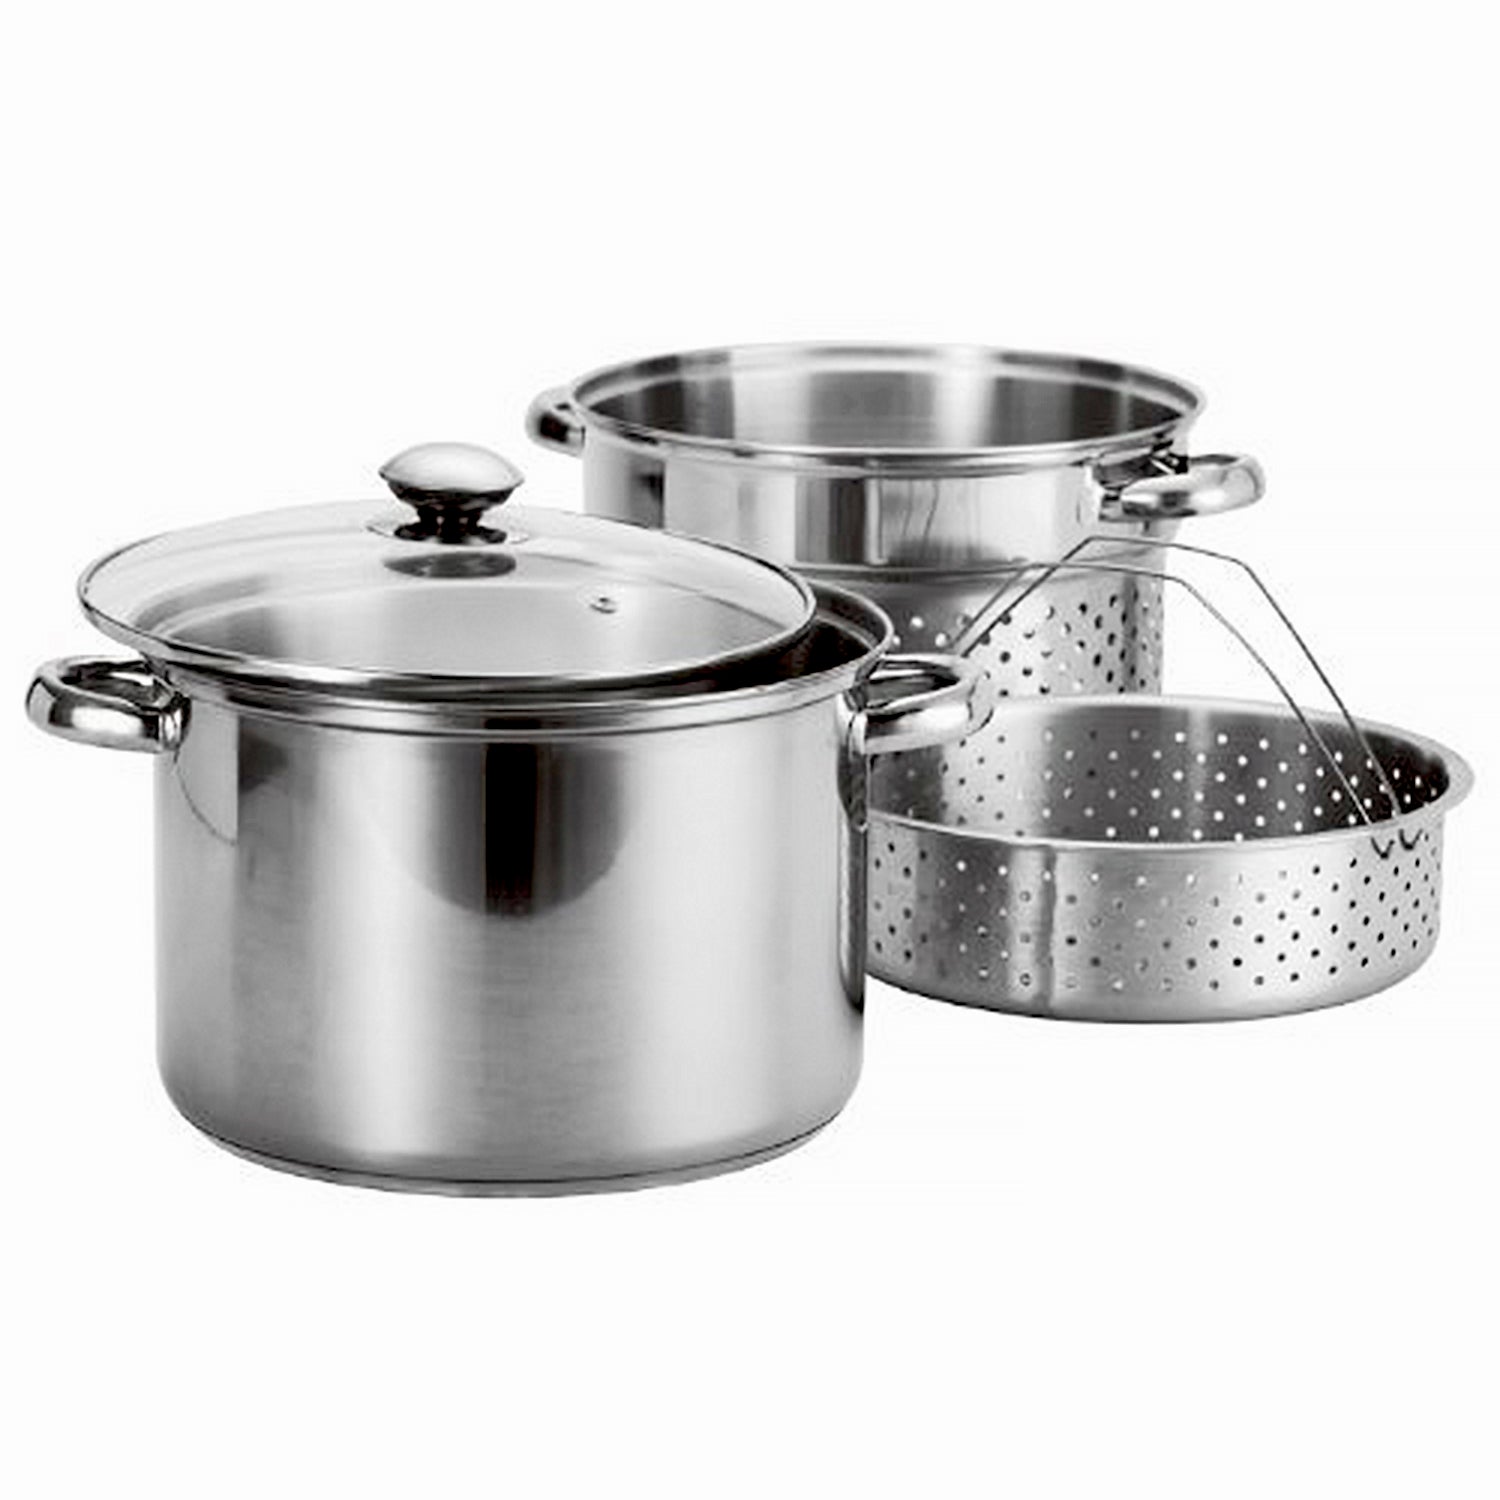 Stainless Steel Steamer Cooking Pots Cookware Set With Lid For Kitchen -  Buy Aluminum Stock Pot,Camping Cooking Pot,Stainless Stock Pot Product on